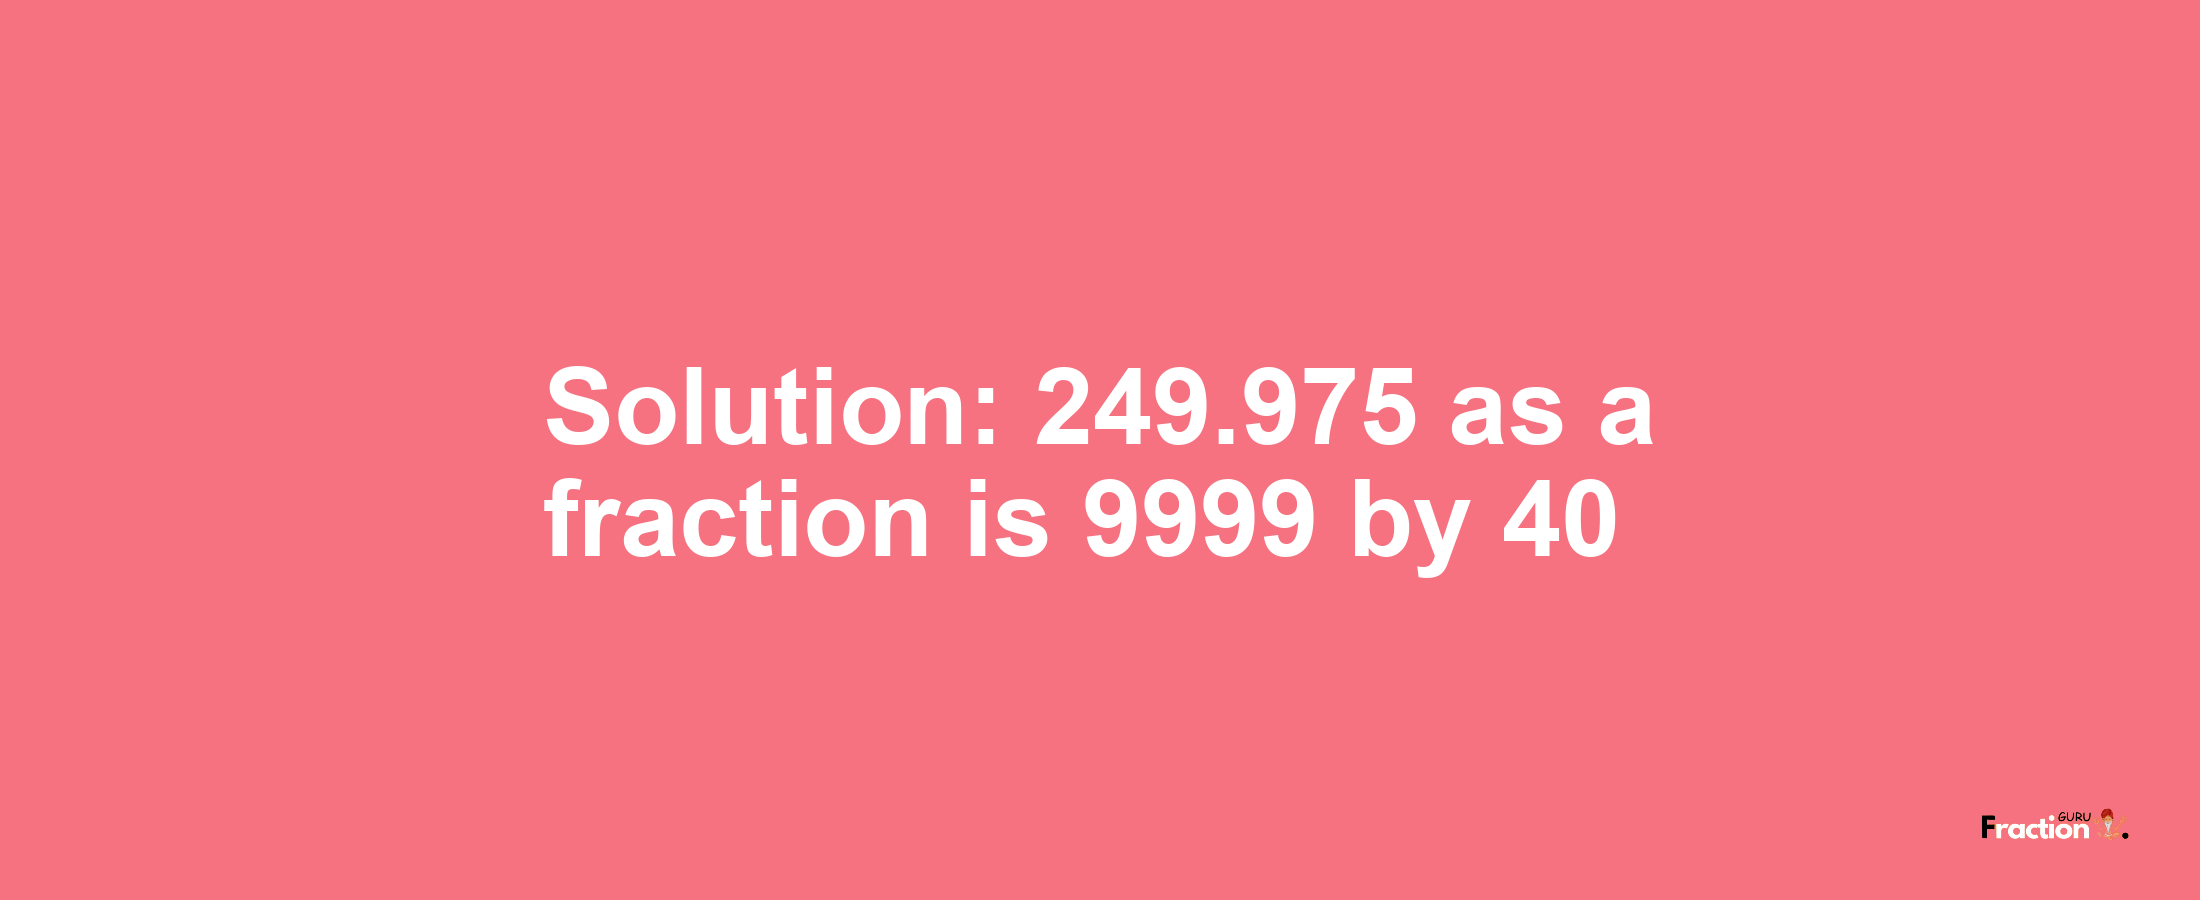 Solution:249.975 as a fraction is 9999/40